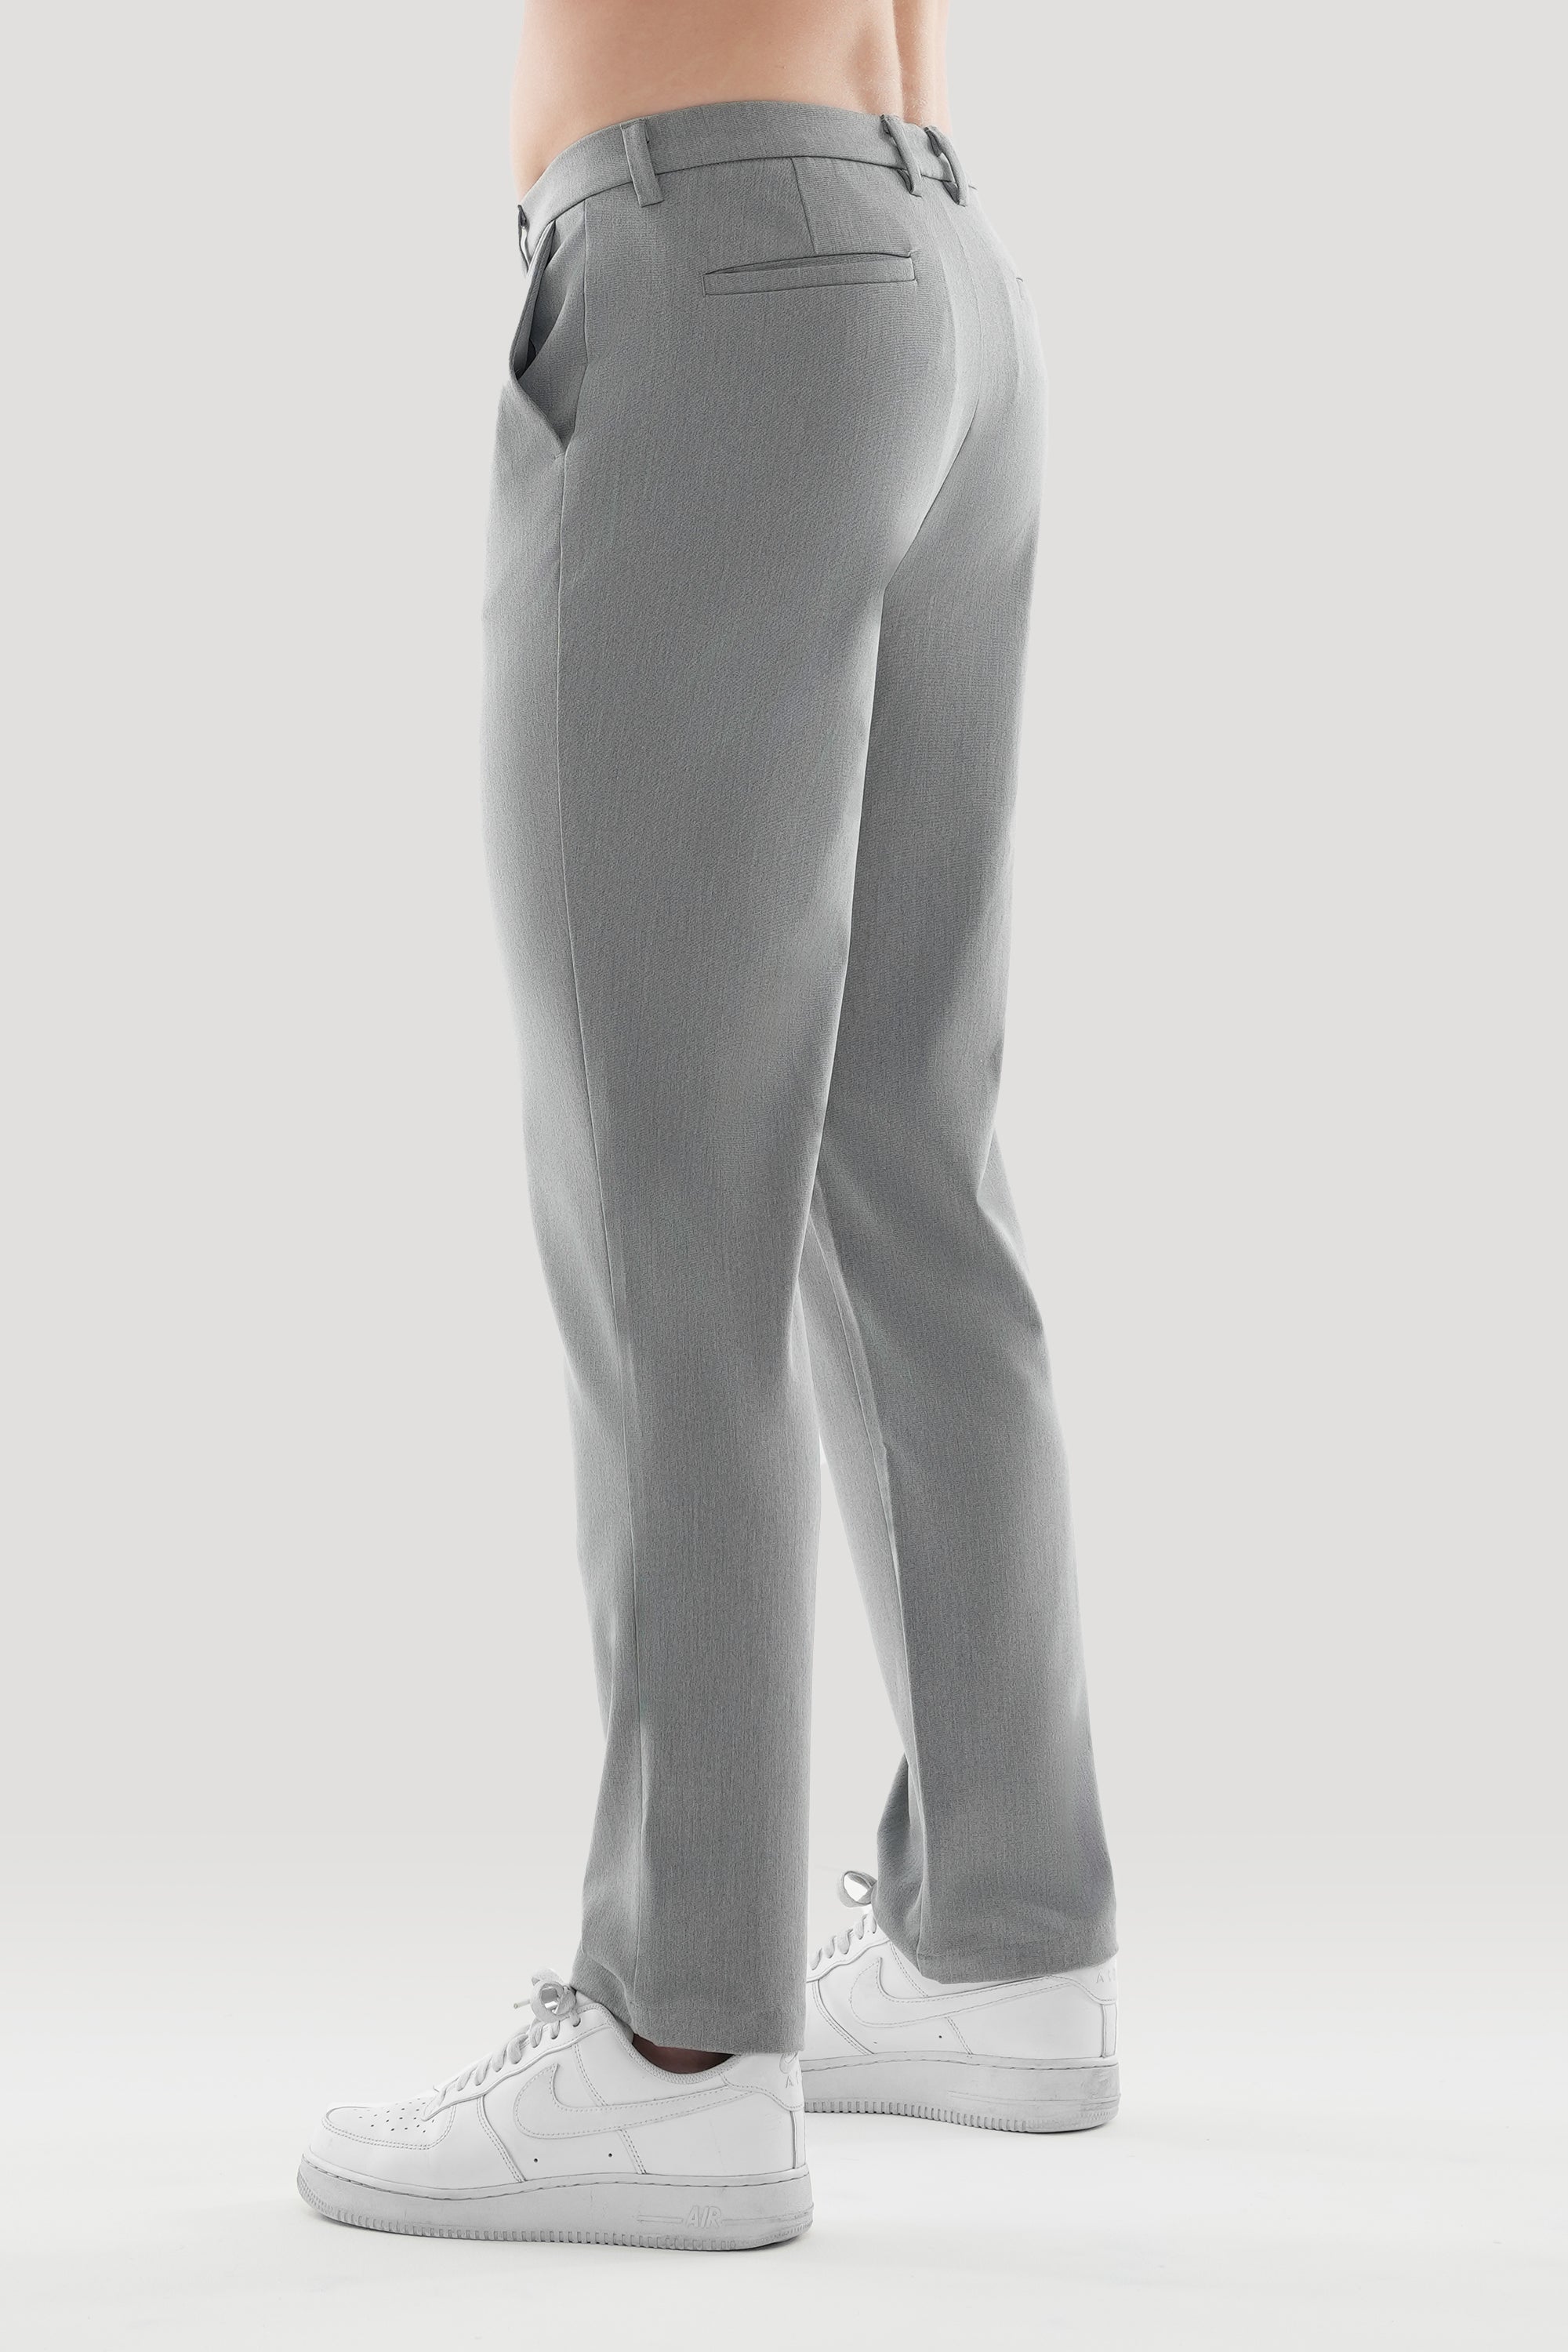 THE LUCIA TROUSERS - LIGHT GREY